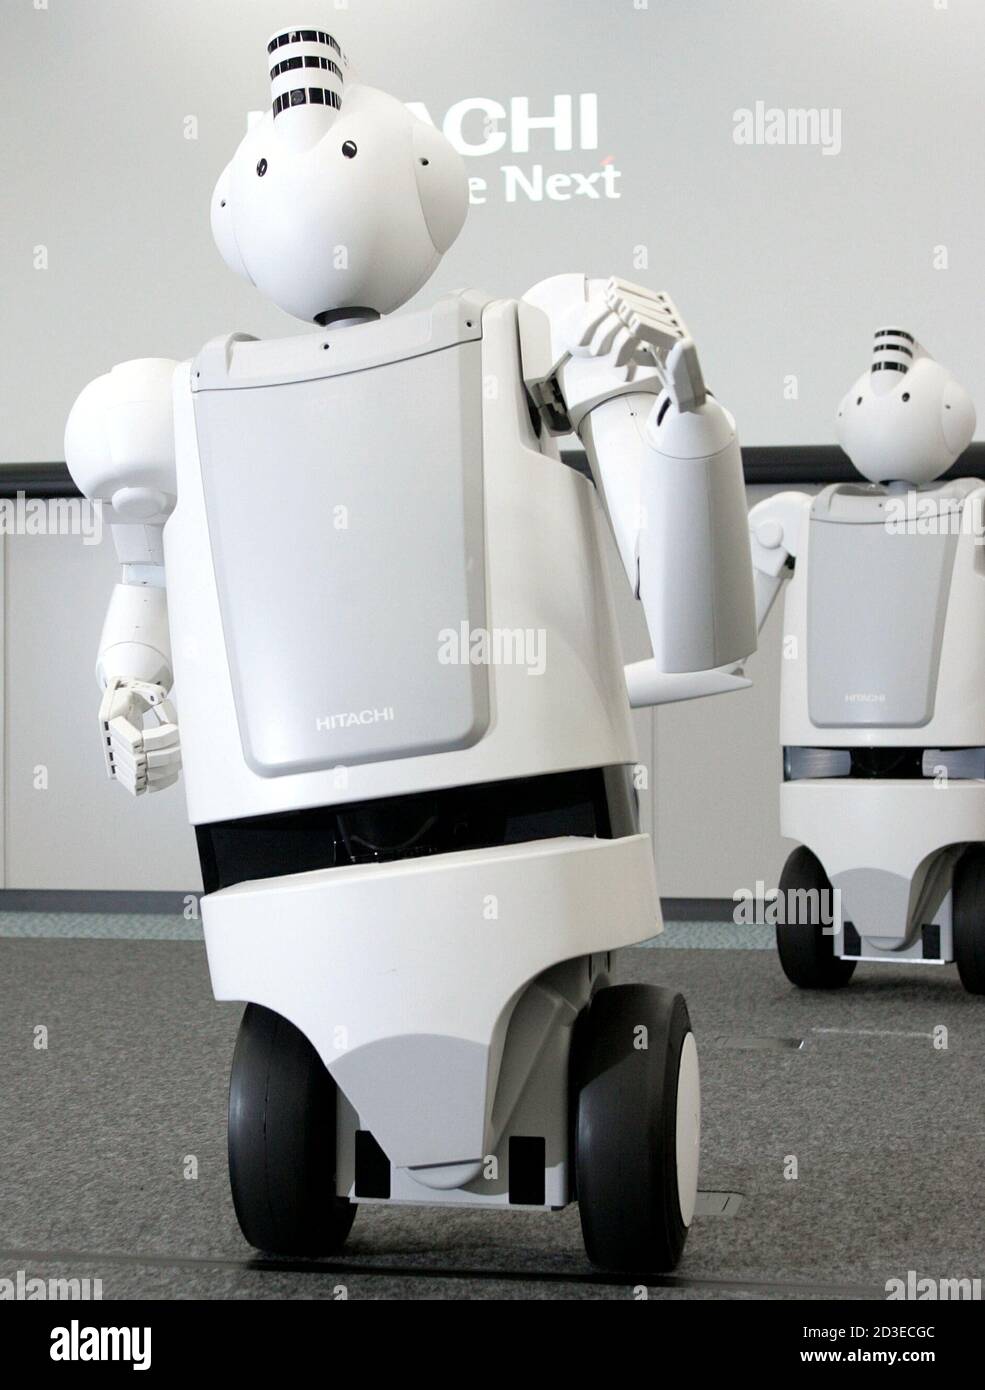 Japanese electronics conglomerate Hitachi's new humanoid robot "Emiew"  turns as it moves during a demonstration in Tokyo March 15, 2005. The  two-wheeled robot, which can move at a speed of up to